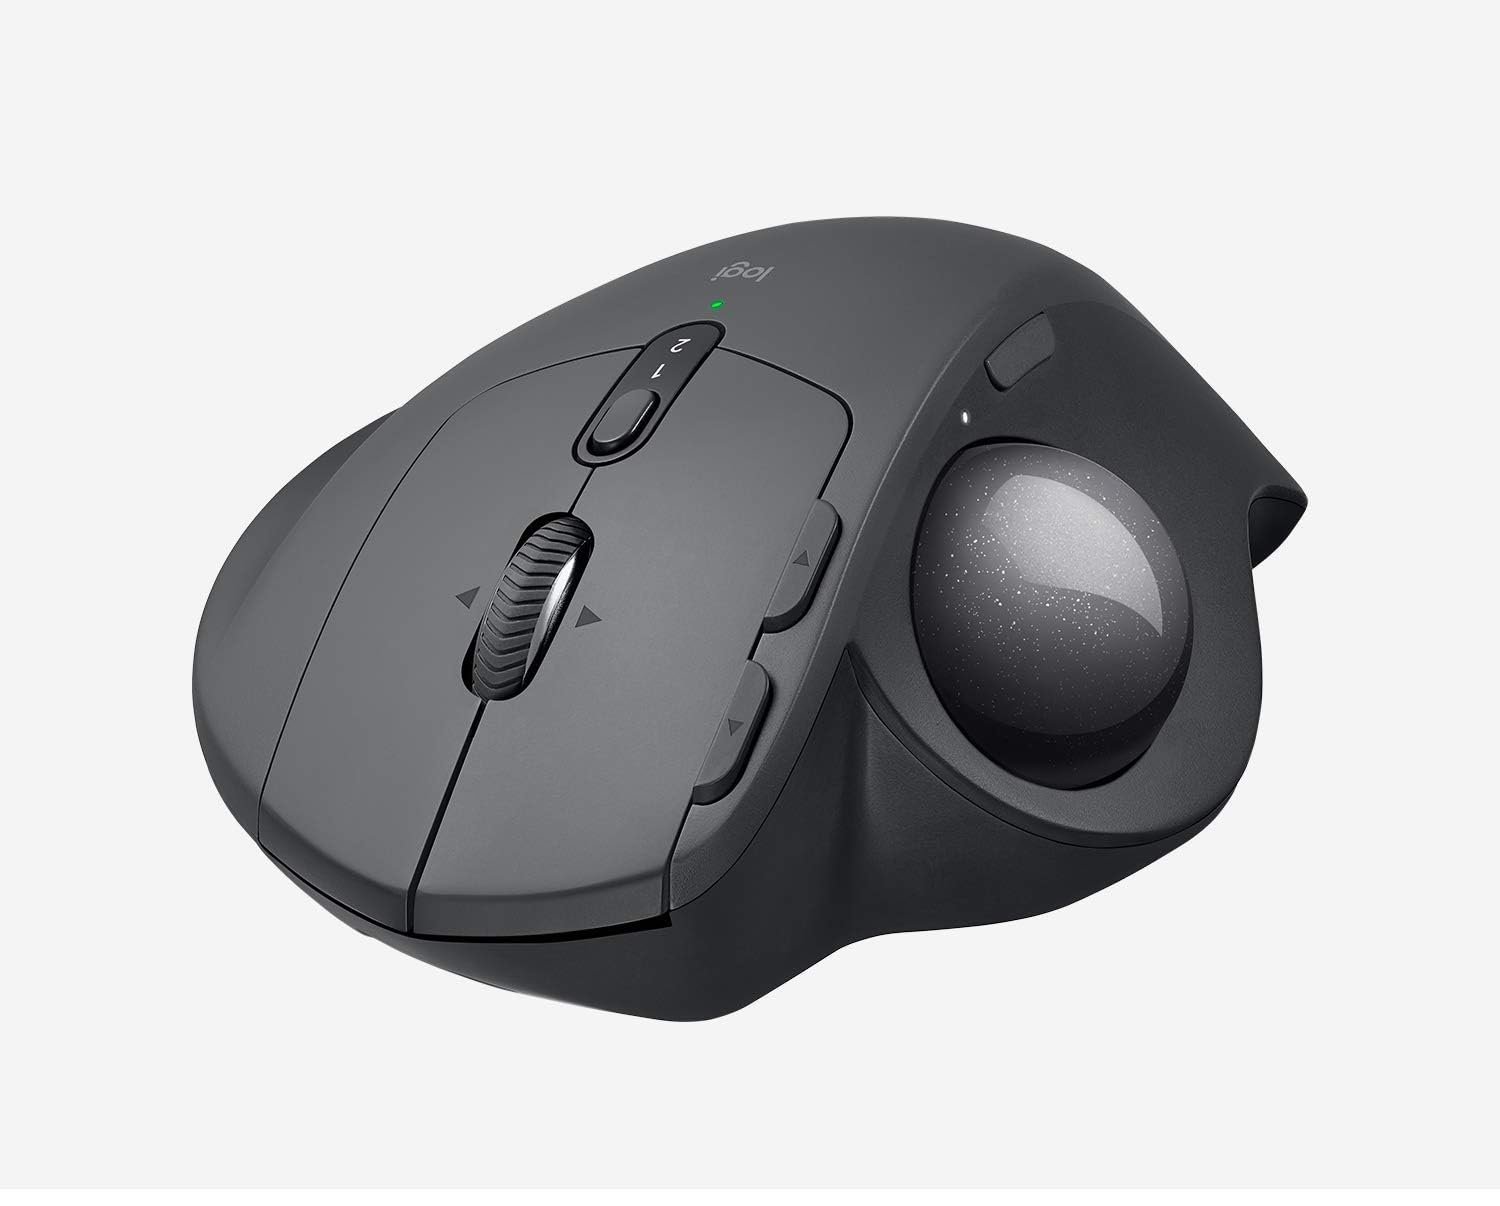 Logitech MX Ergo mouse with trackball now 35% off on Amazon - NotebookCheck.net News